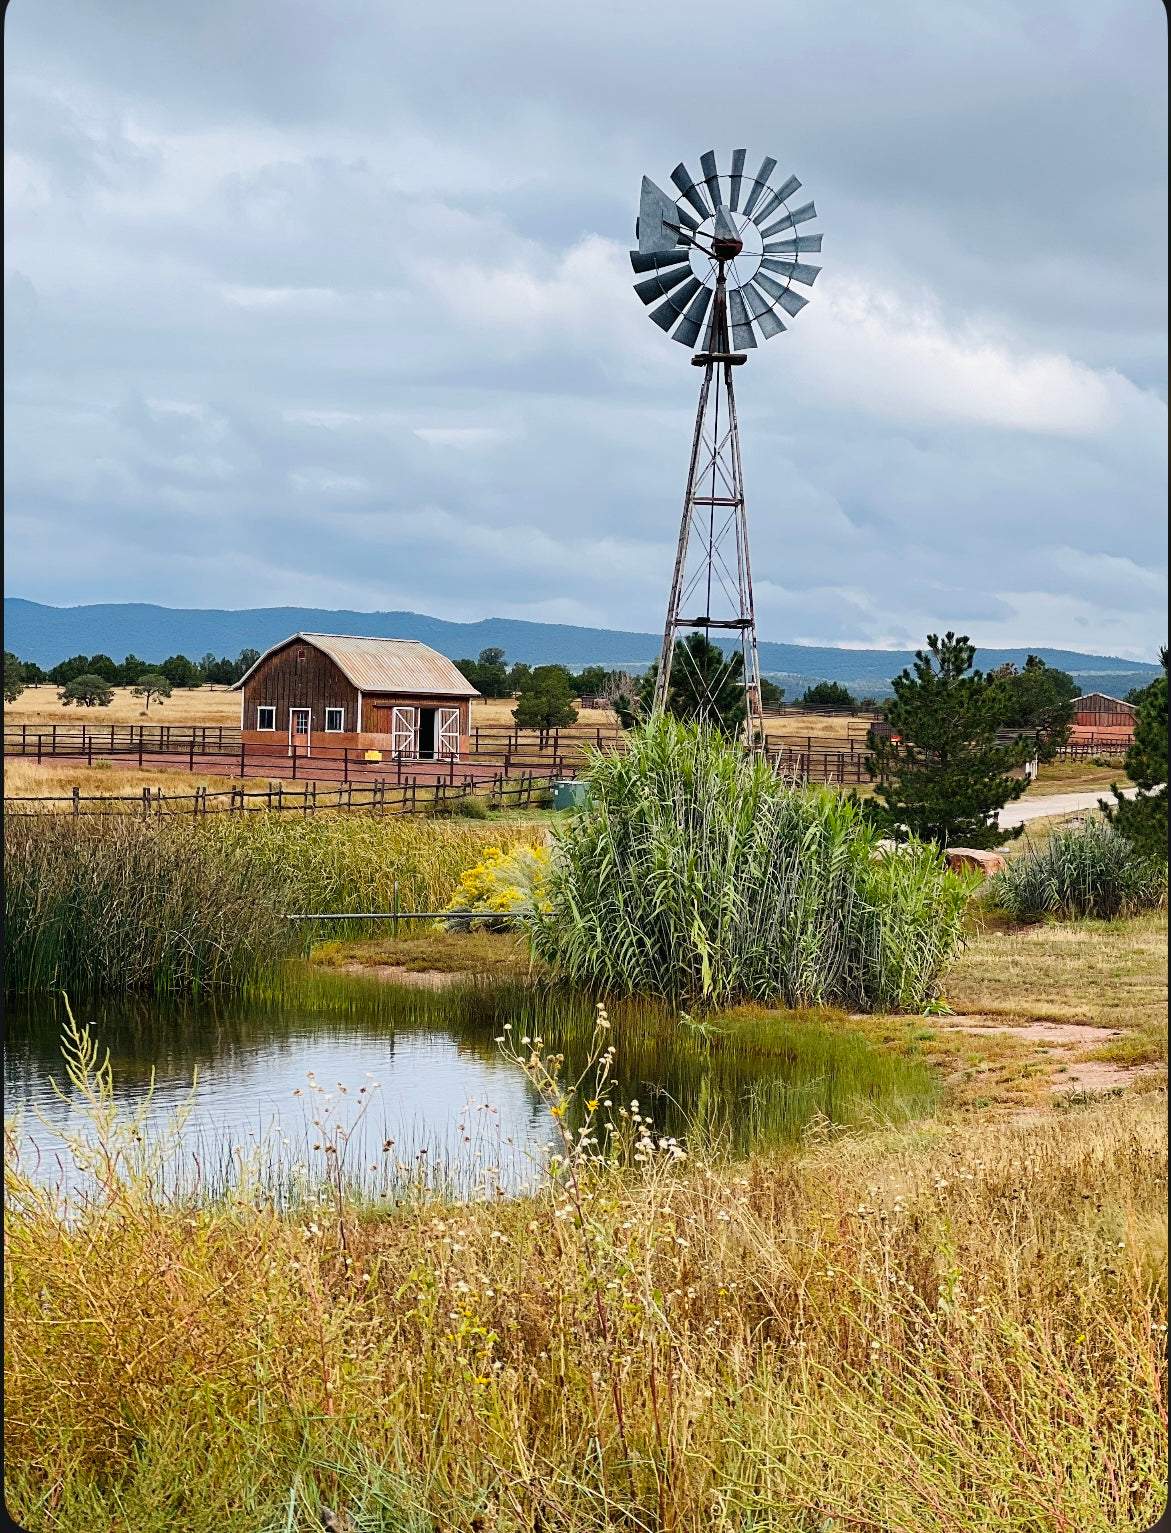 Ranch Windmill - Artist by Attic In Valley - Art Prints, Decoupage Rice Paper, Flat Canvas Prints, Giclee Prints, Photo Prints, Poster Prints, Scrapbook Paper